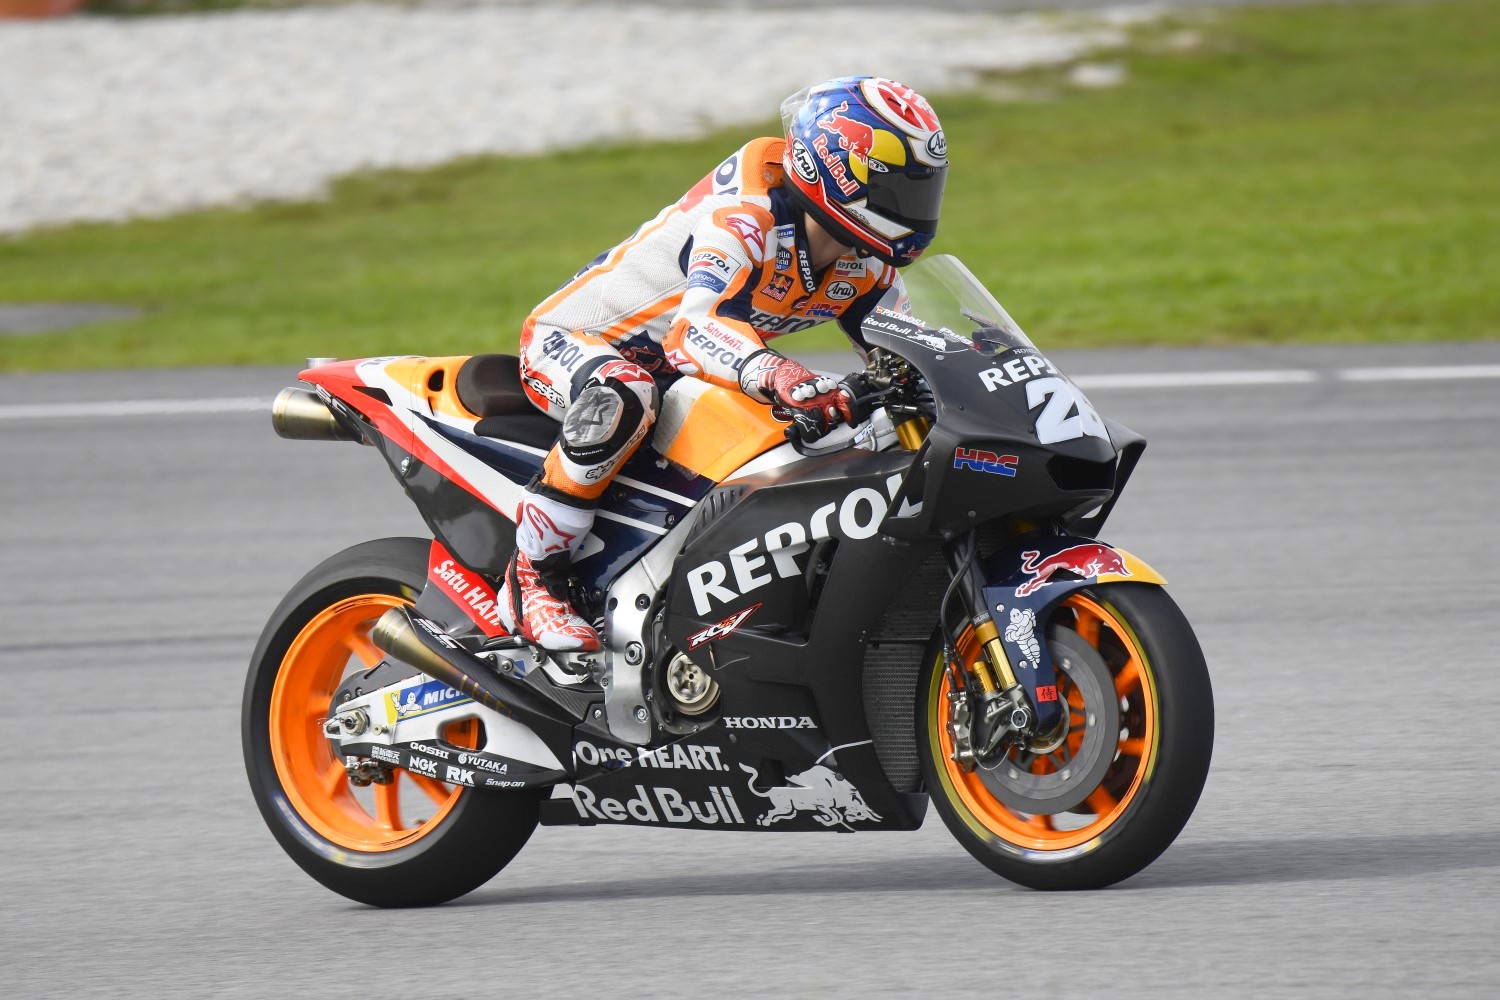 The Repsol Honda riders were out of bikes with different bodywork